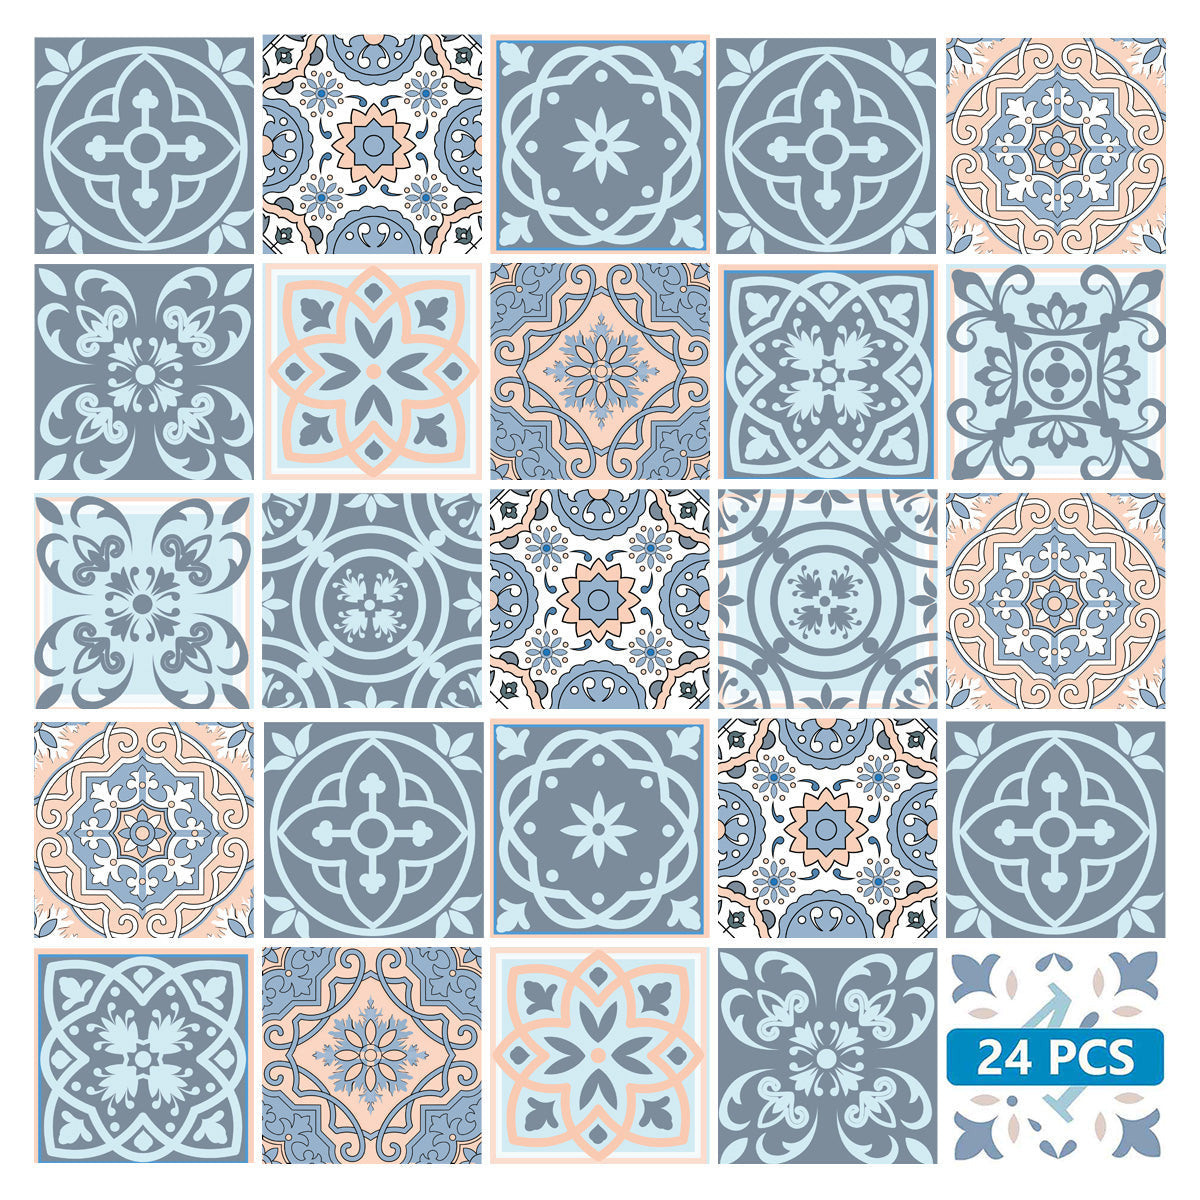 4" X 4" Baby Blue And Peach Mosaic Peel And Stick Removable Tiles